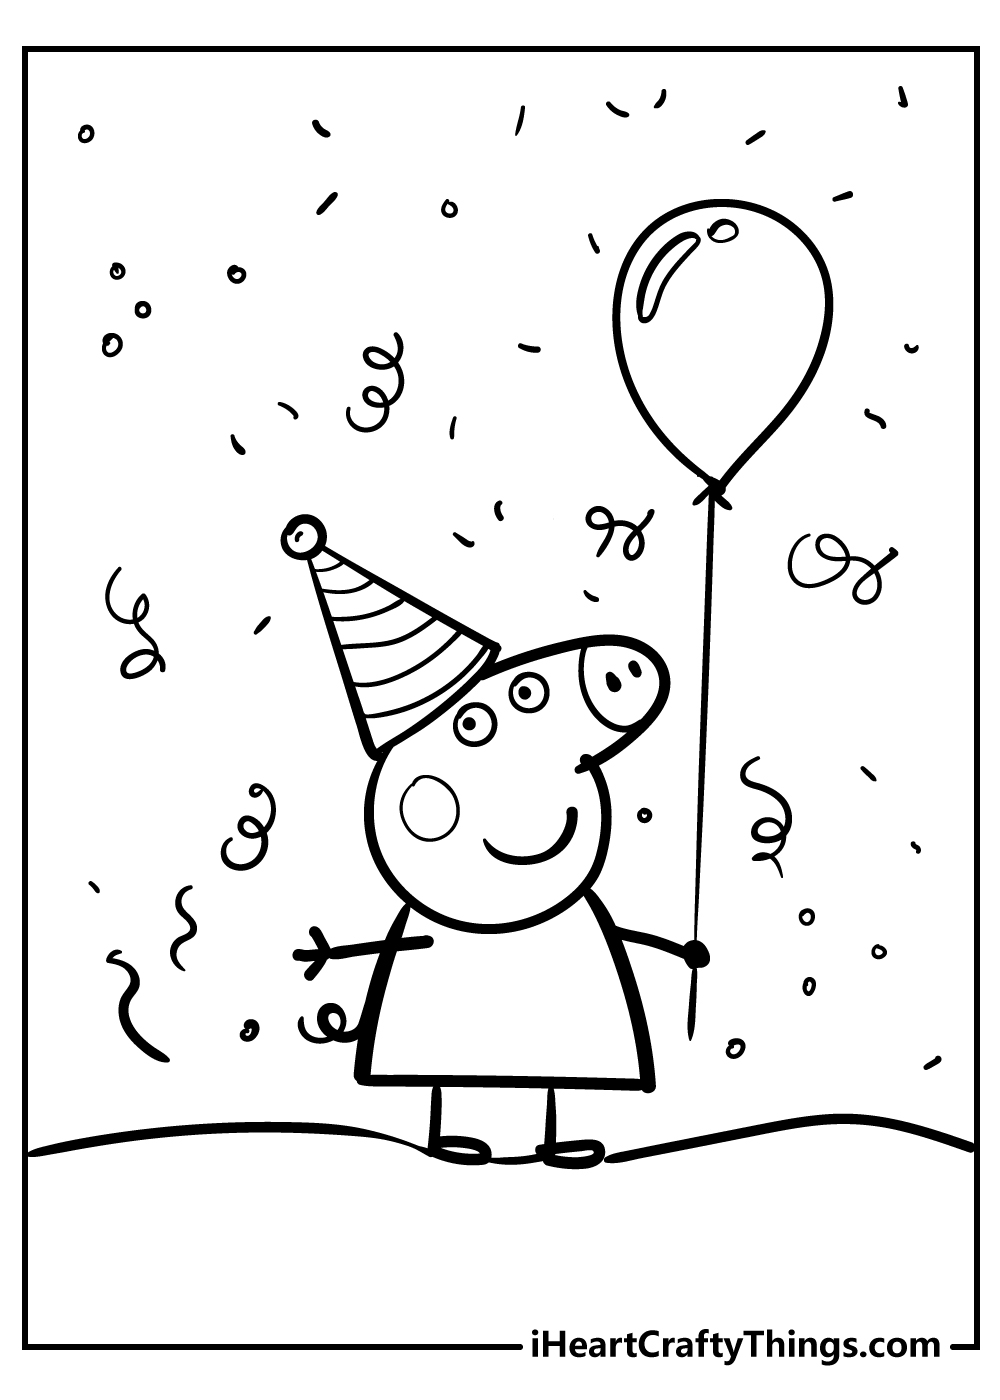 Peppa Pig coloring pages free pdf download